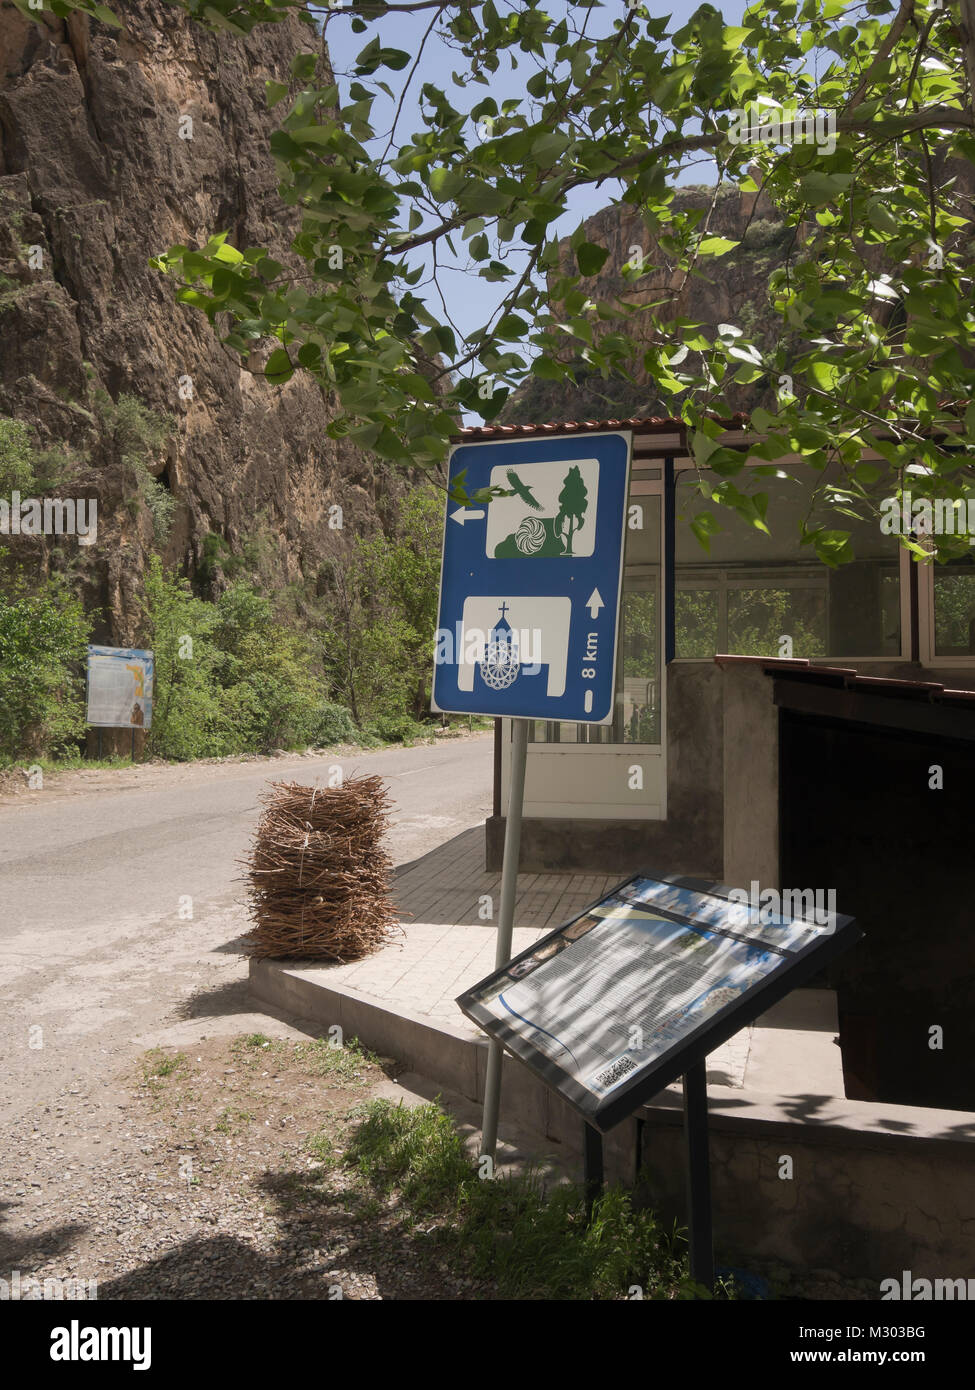 Pictorial traffic sign pointing to the cultural heritage Noravank monastery and the senic gorge with wildlife in the way in Stock Photo